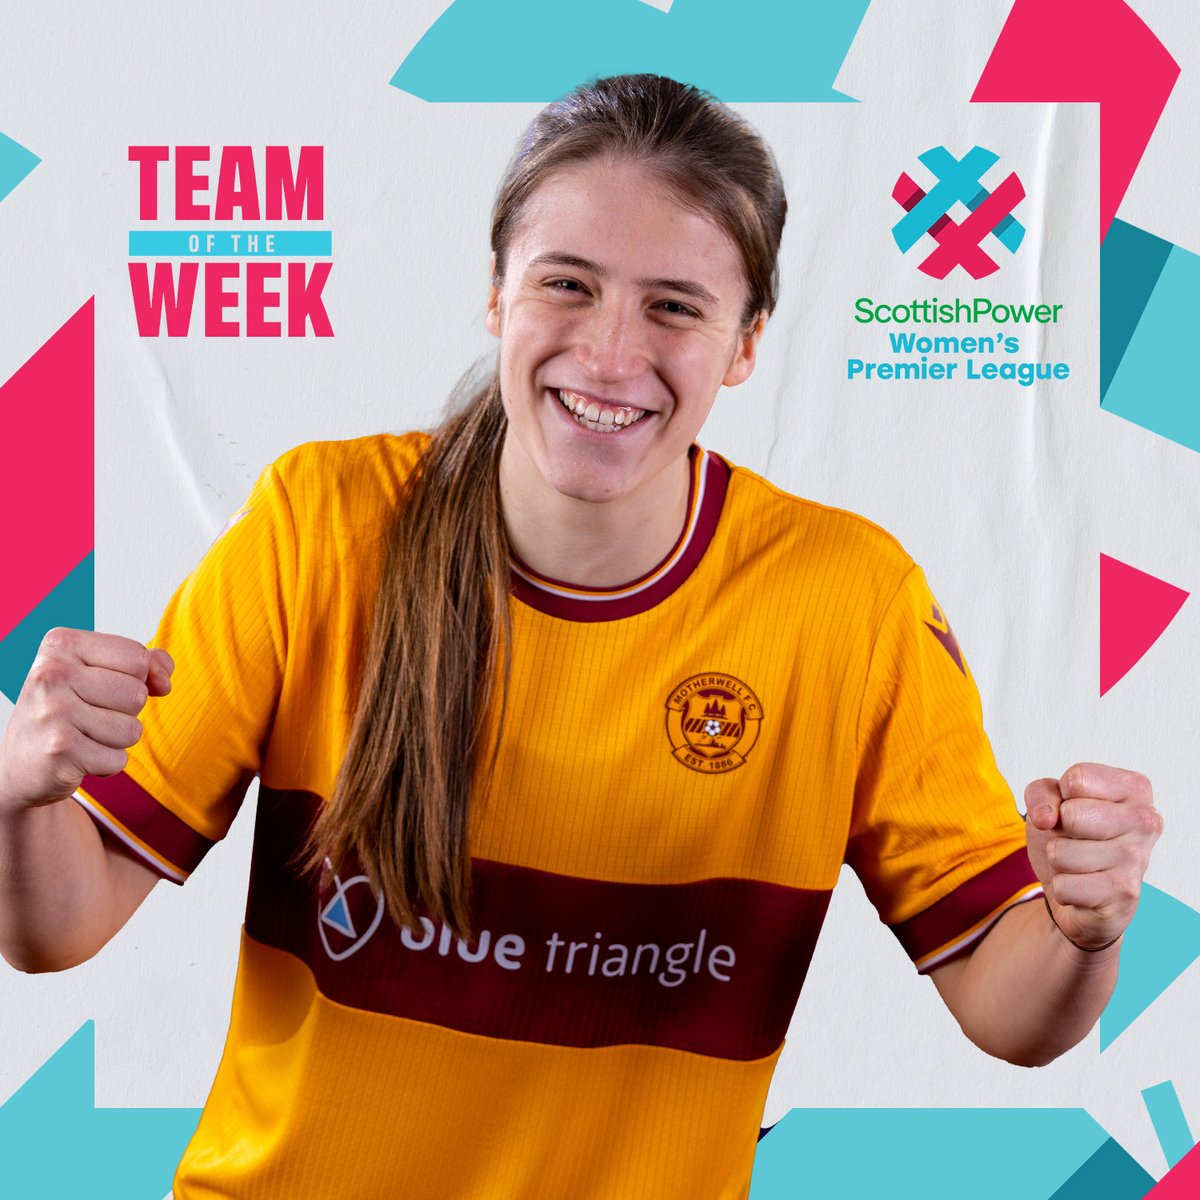 Back-to-back nominations 💪 Striker Laura Berry successfully retains a place in the @SWPL team of the week. @laura_berry07